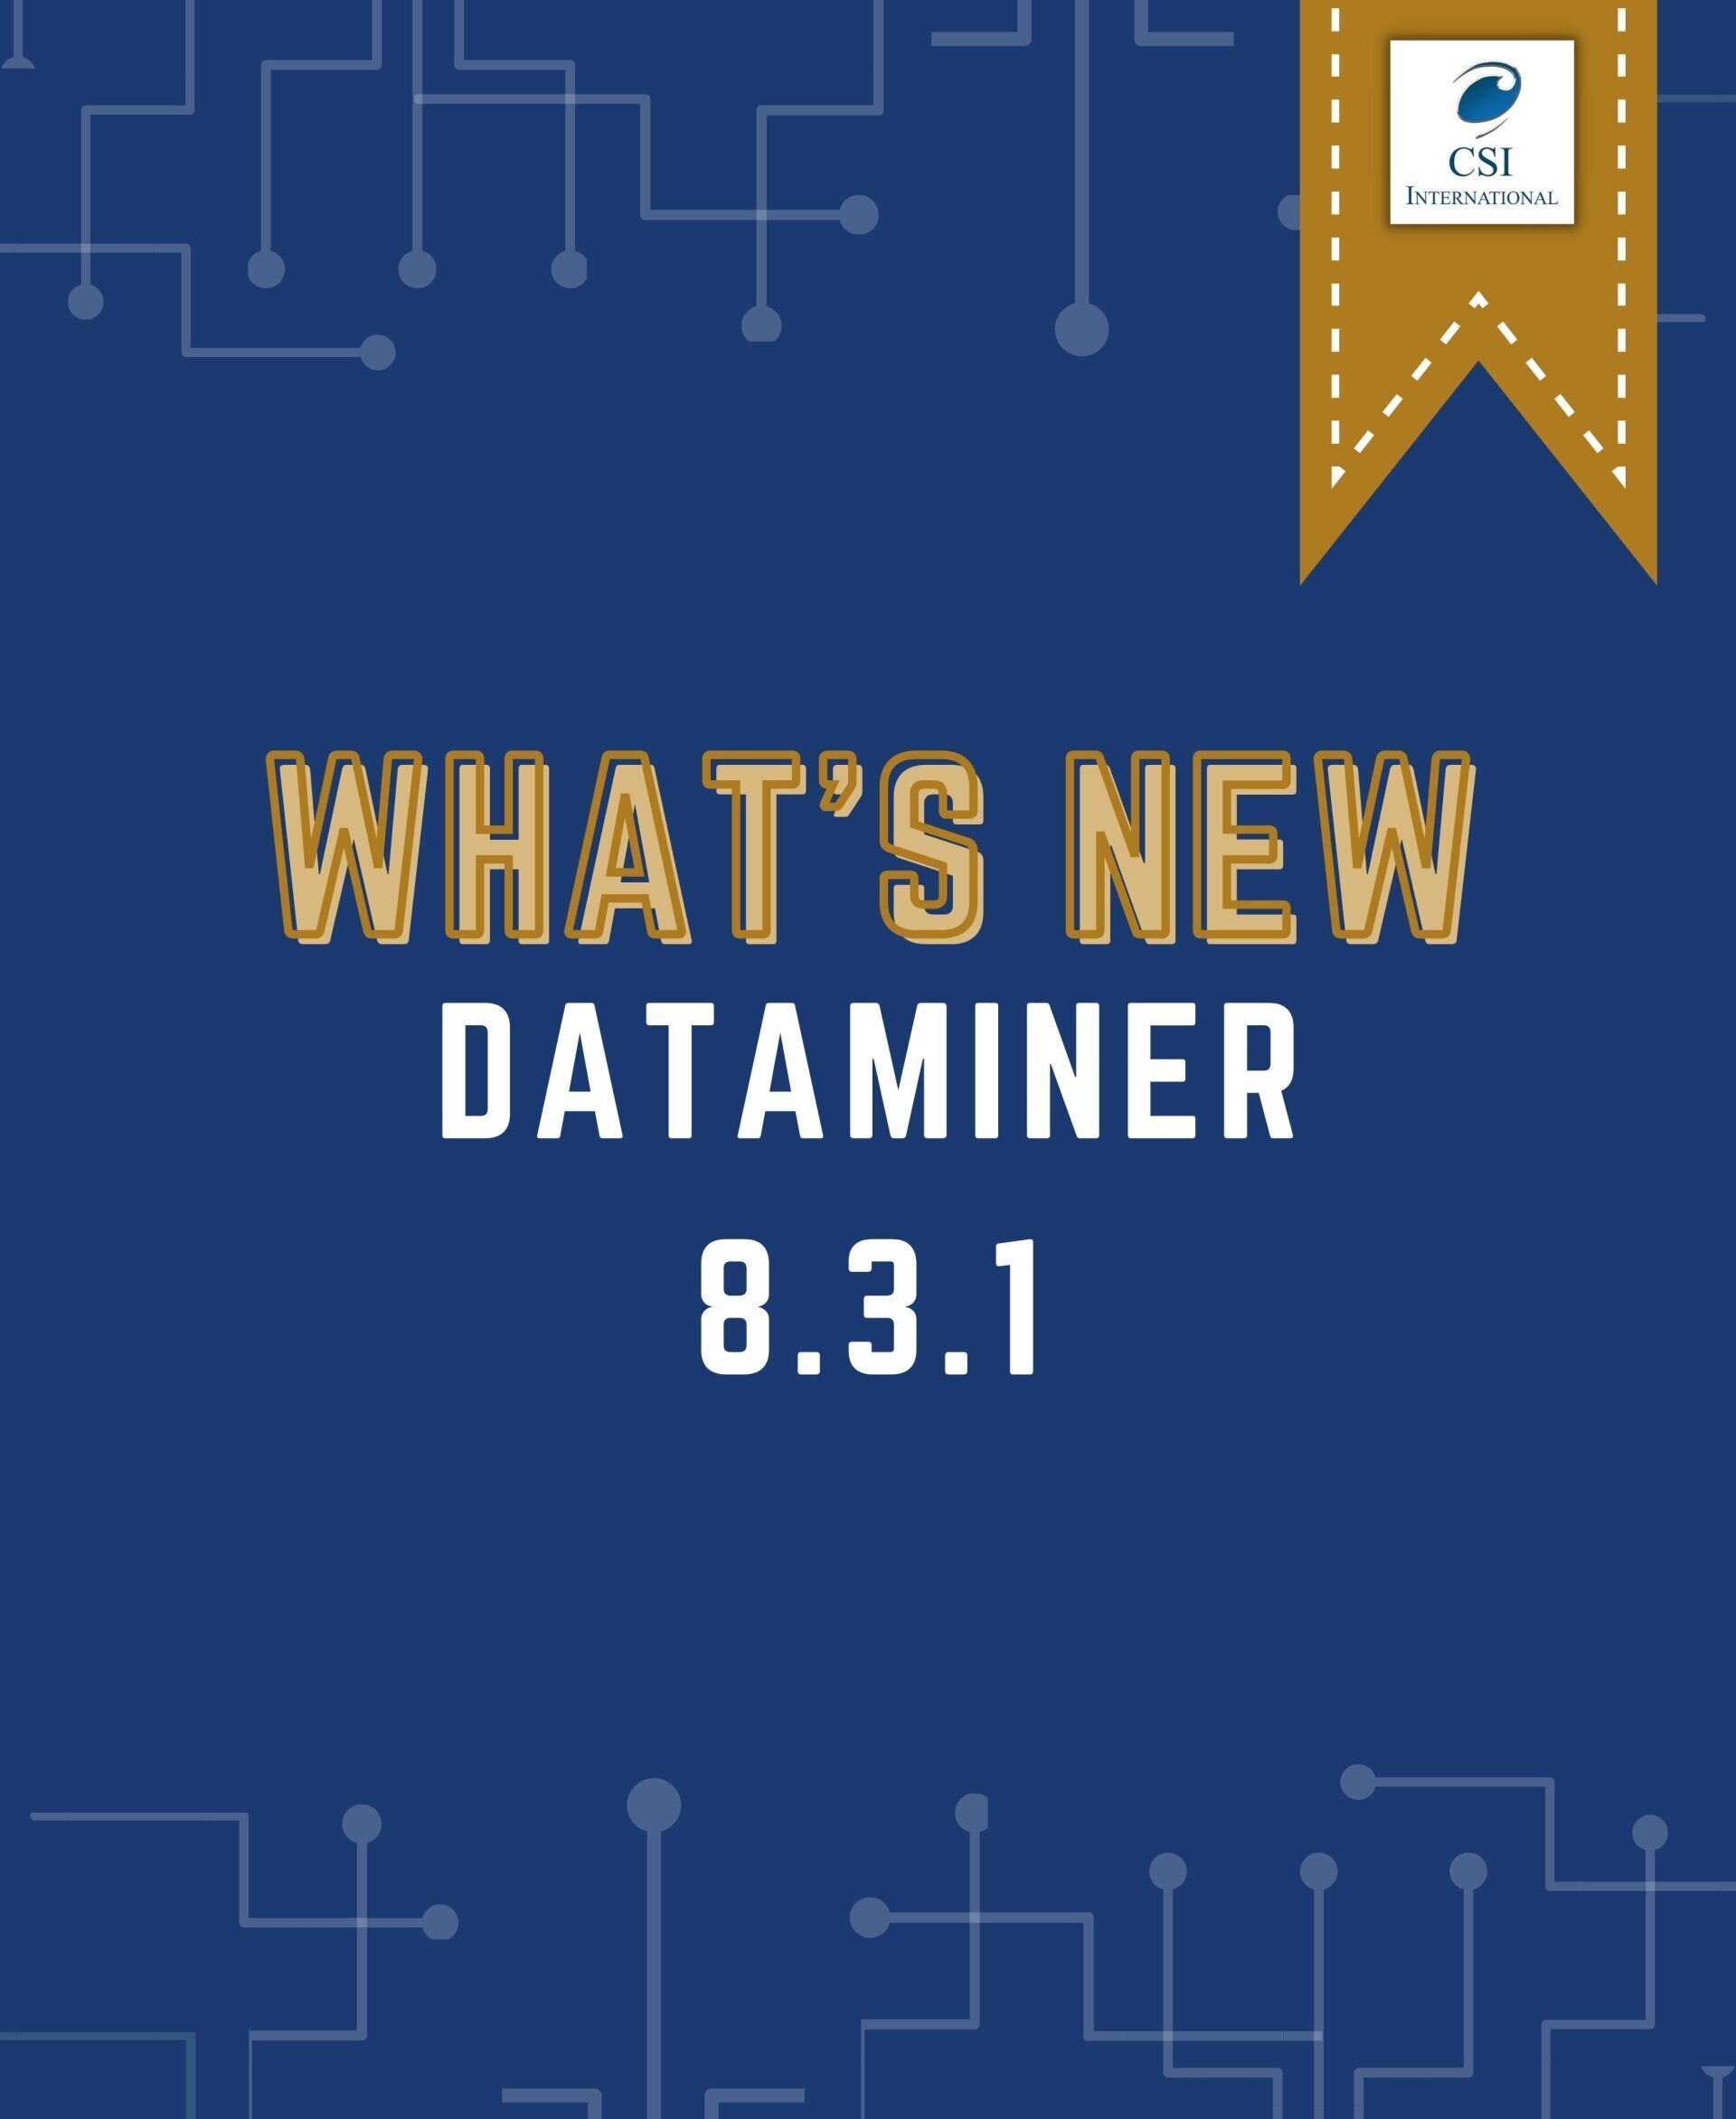 dataminer from csi new features image